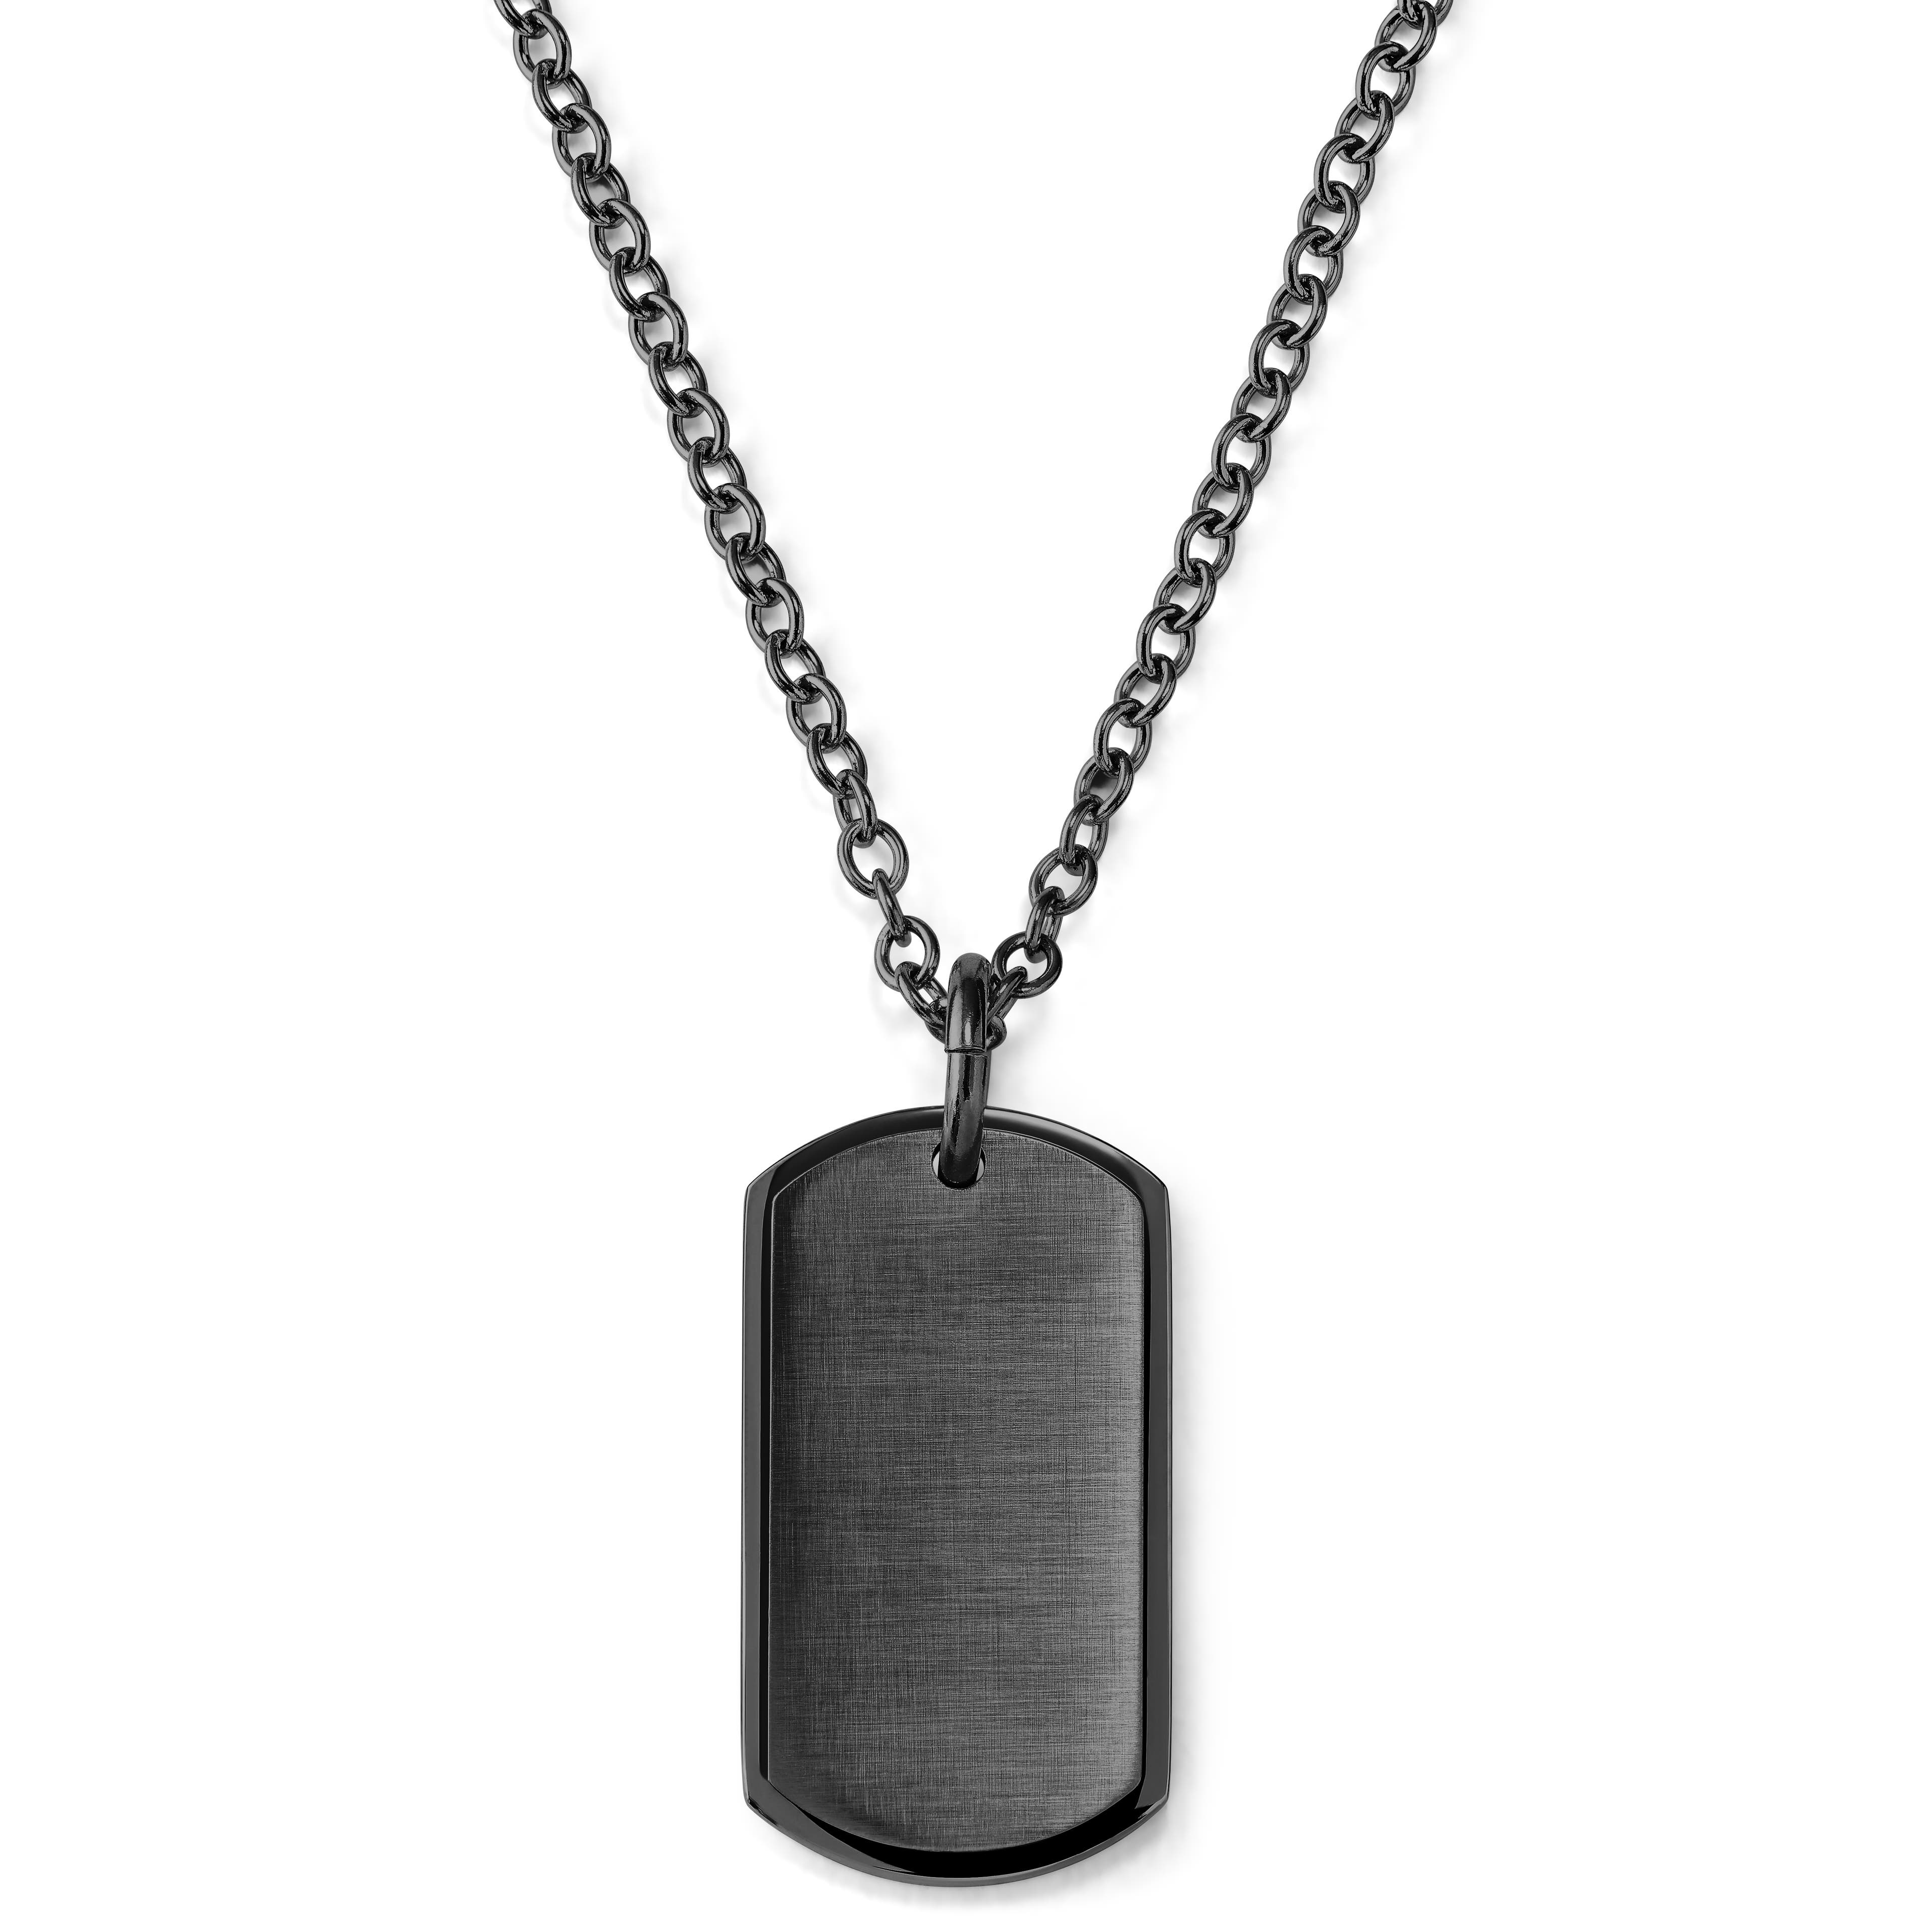 Black Stainless Steel ID Dog Tag Cable Chain Necklace